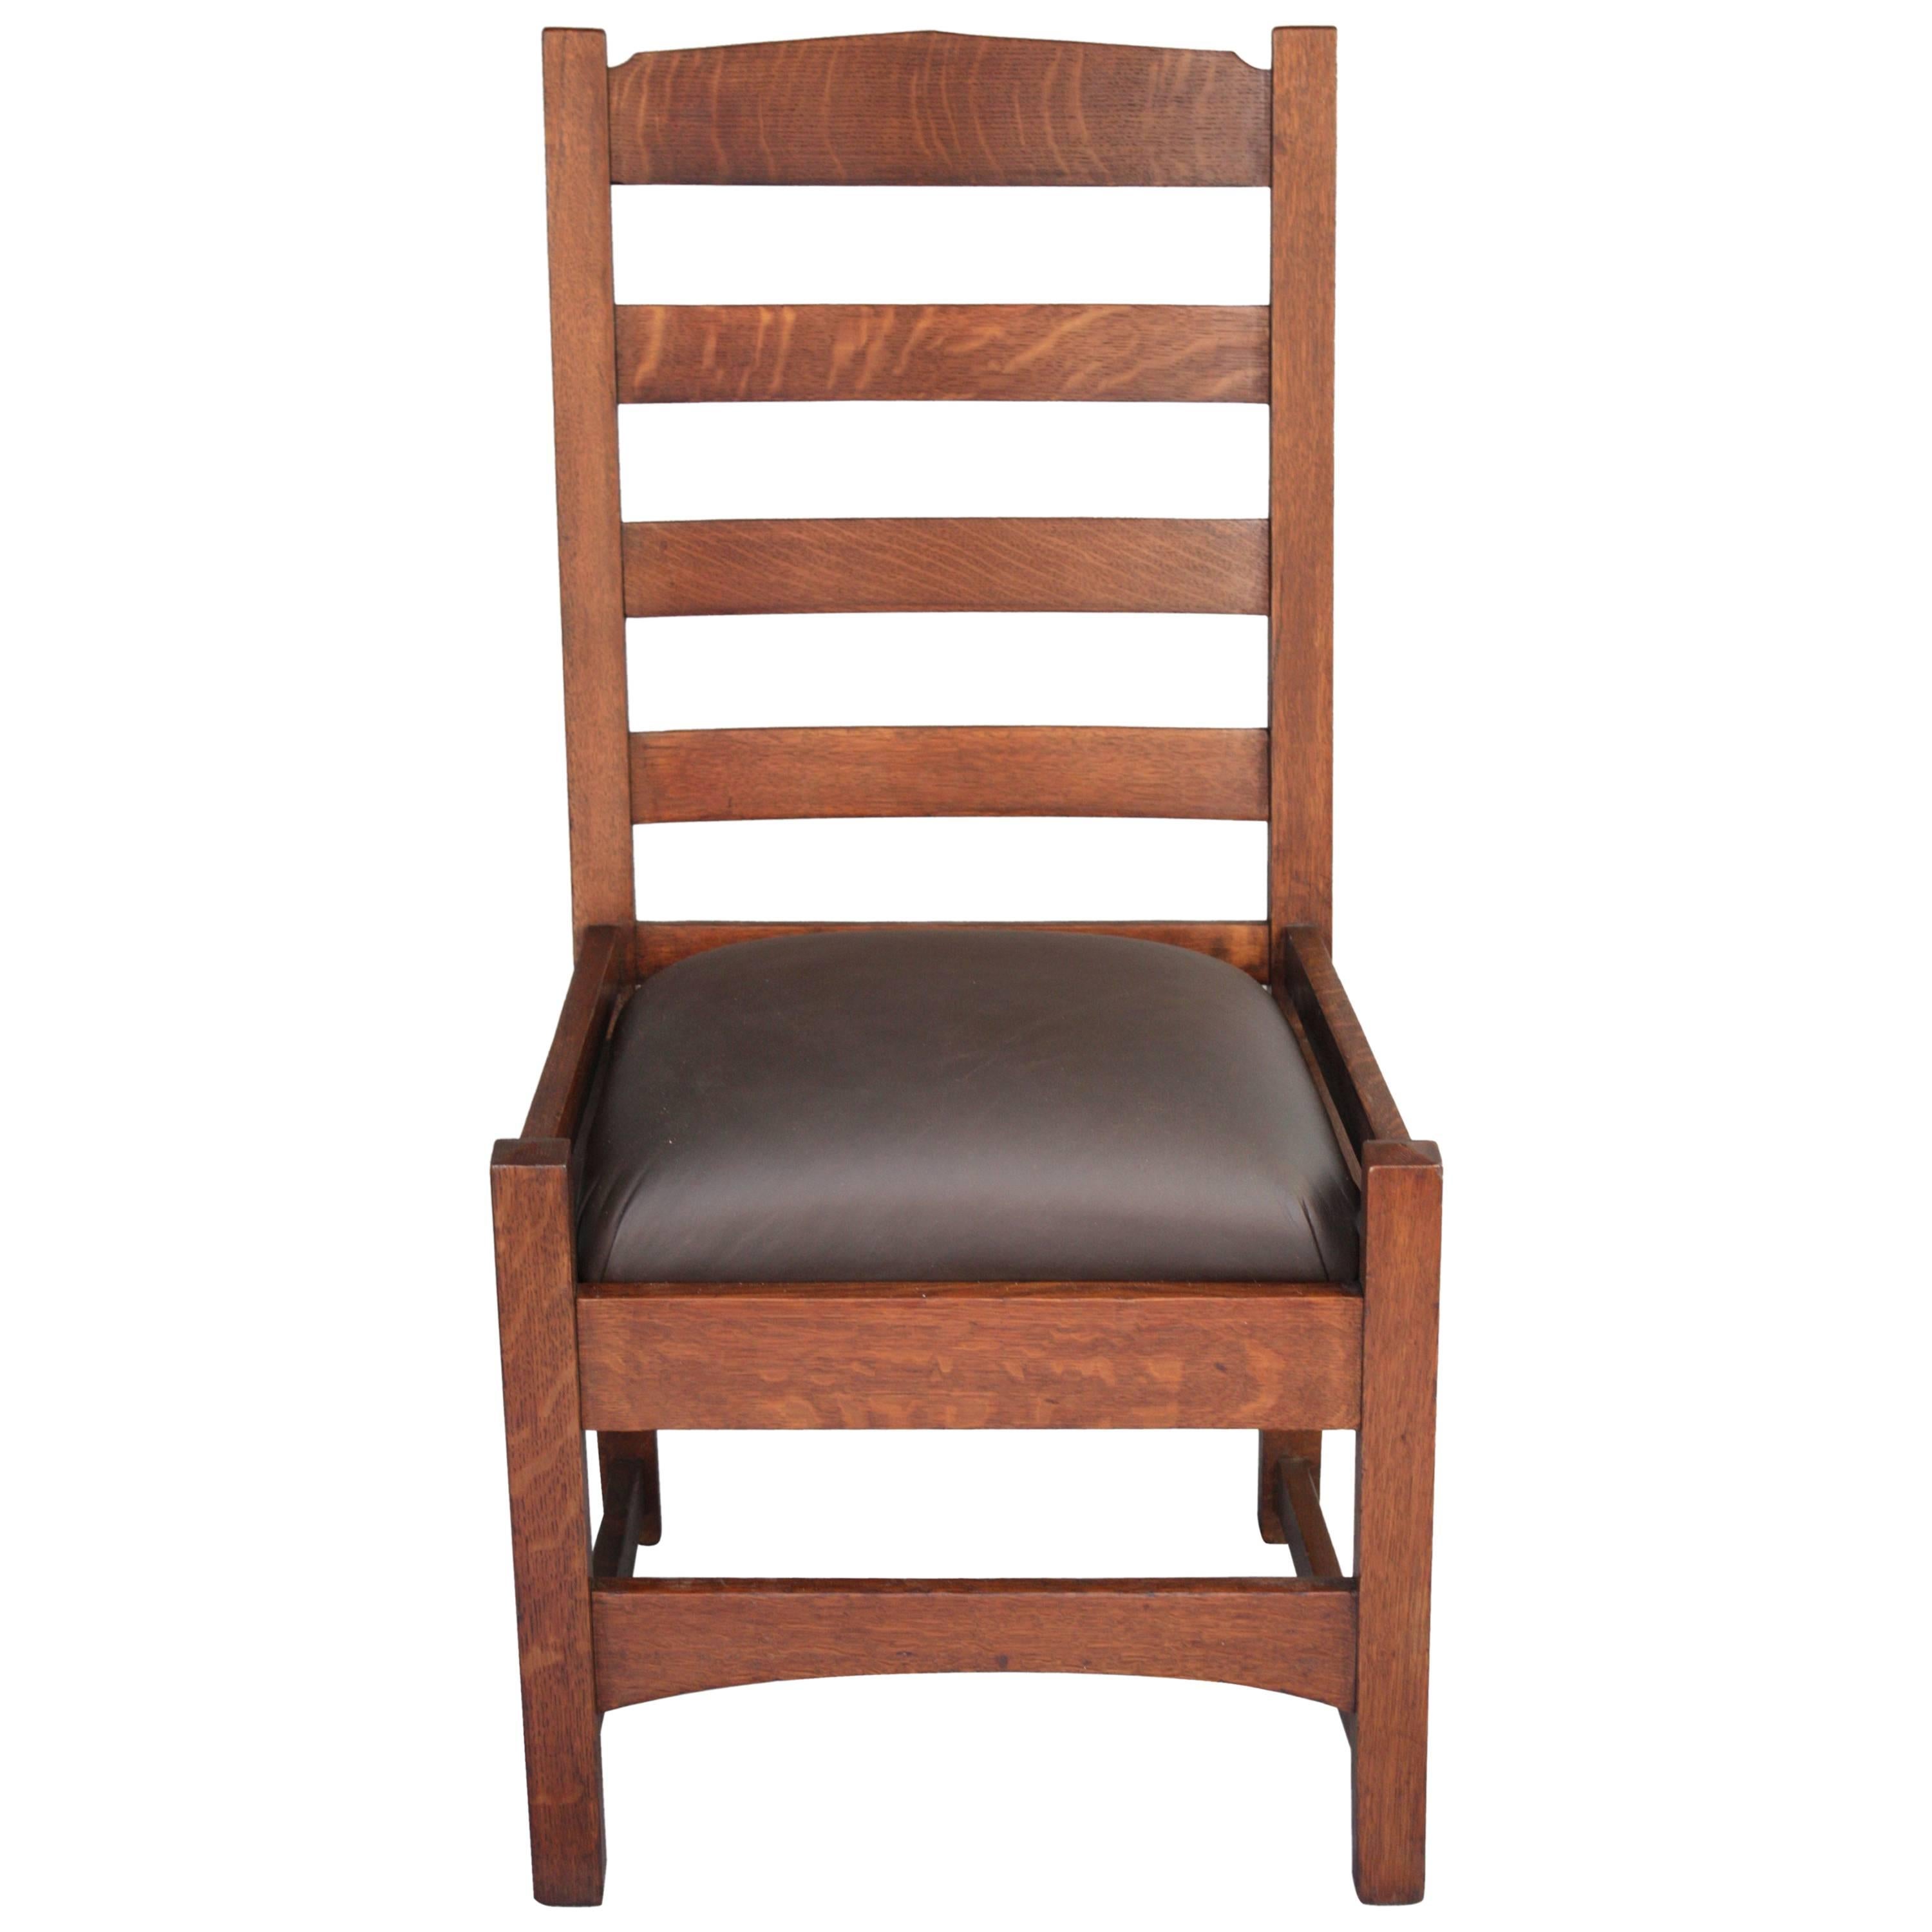 1910 Arts and Crafts Mission Oak Ladder-Back Chair For Sale